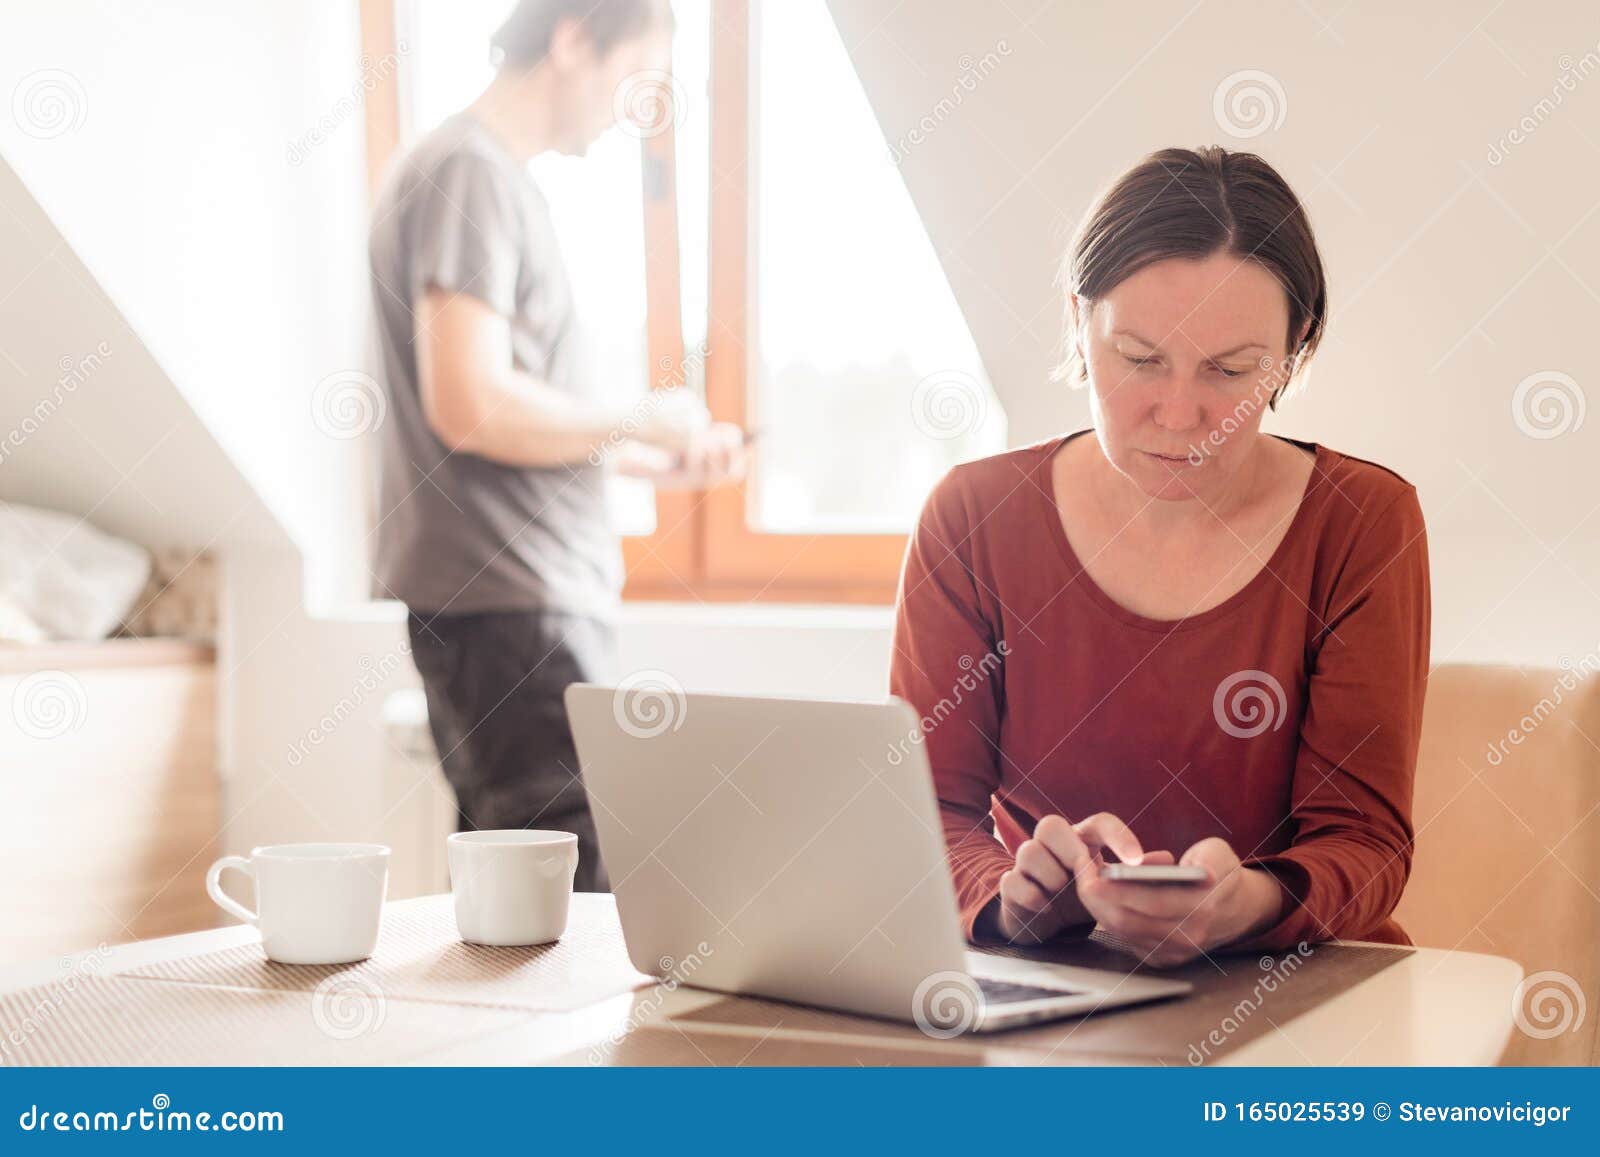 couple telecommuting, woman and man working in home office